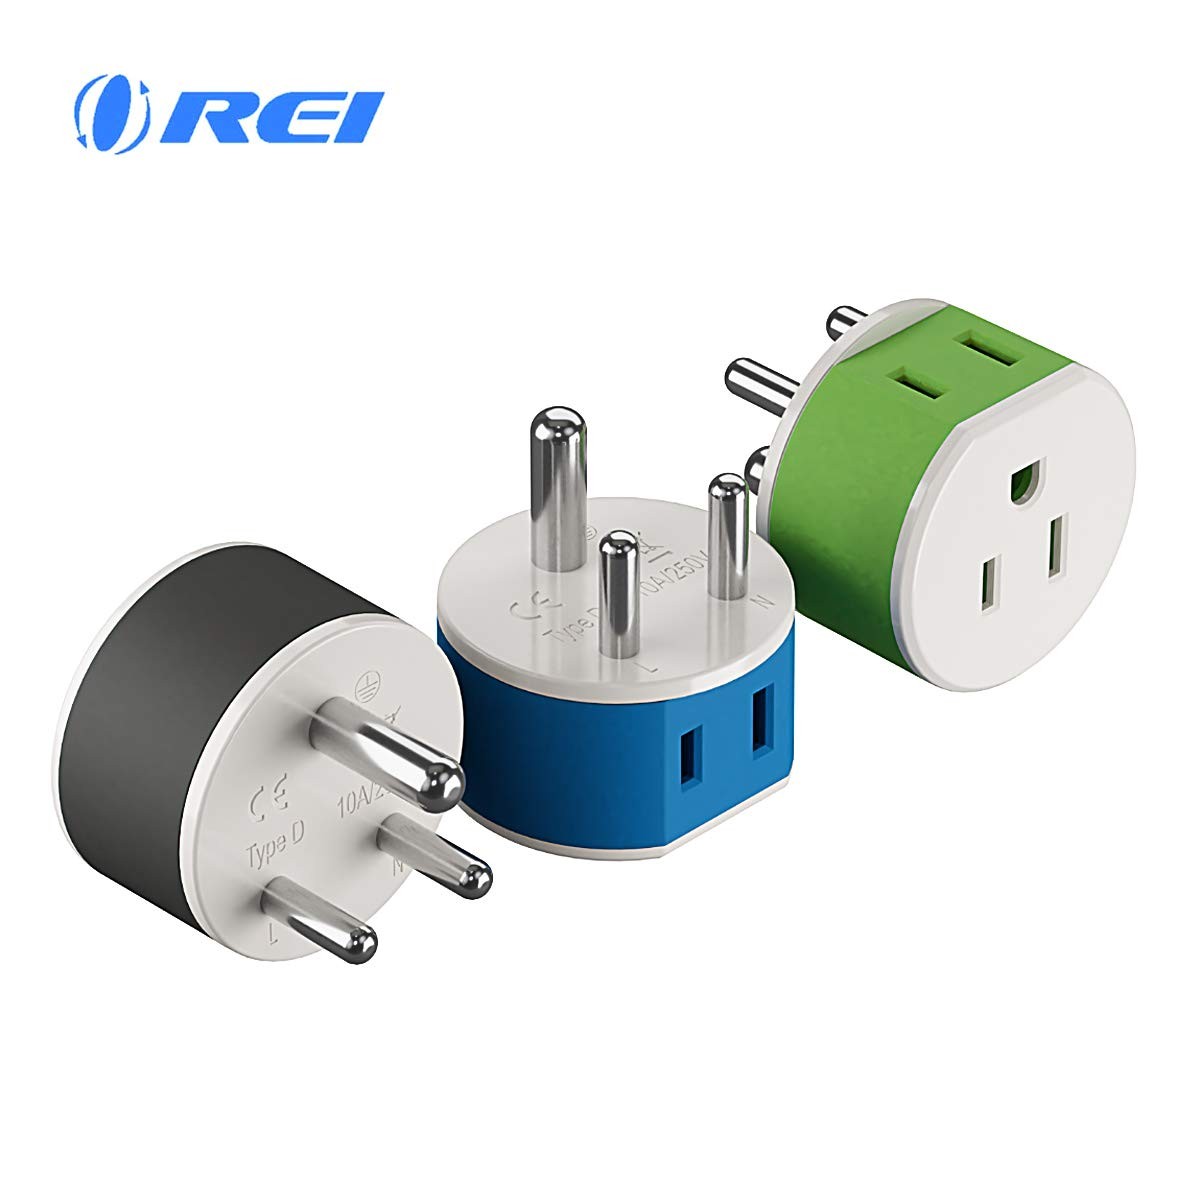 India, Nepal, Maldives Power Plug Adapter by OREI with 2 USA Inputs - Travel 3 Pack - Type D (US-10)